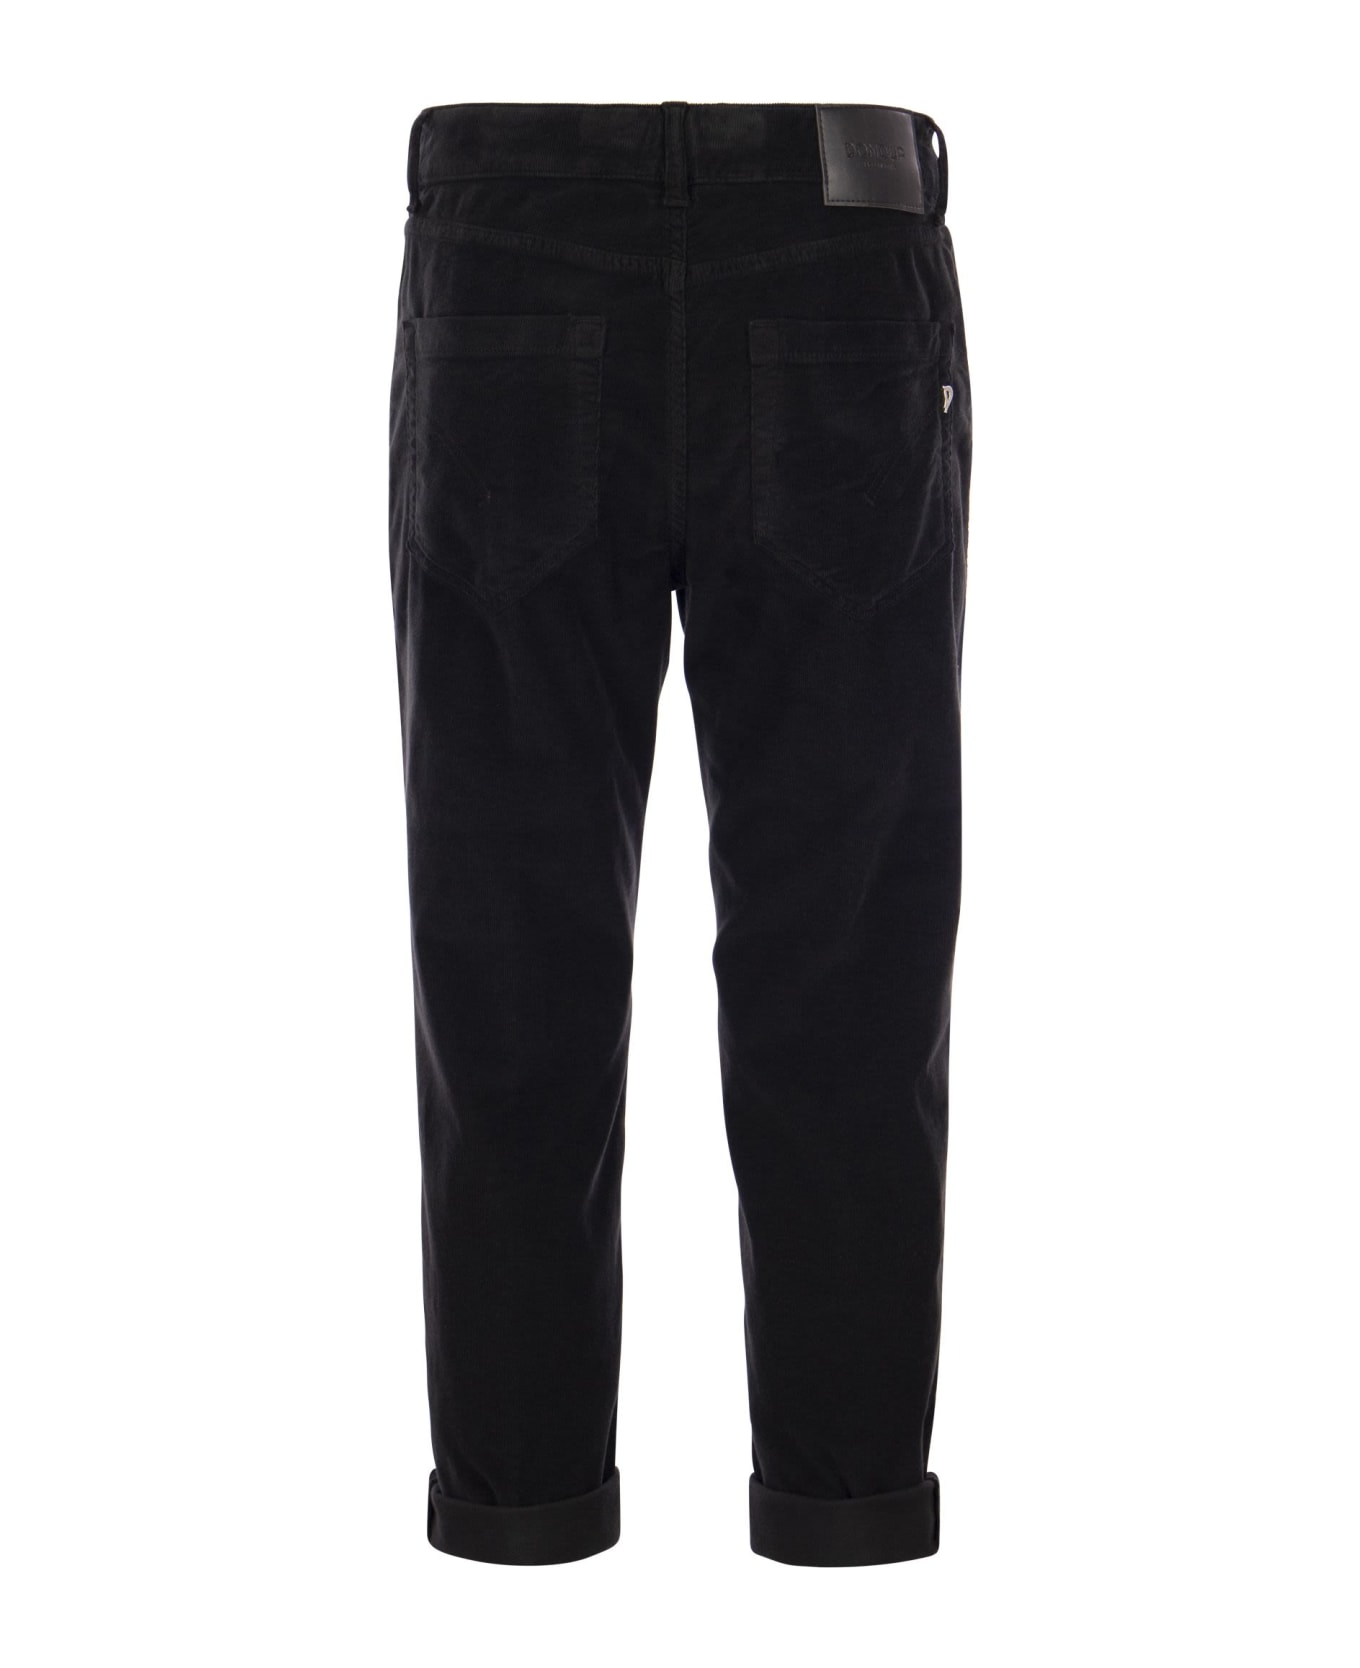 Dondup Koons - Multi-striped Velvet Trousers With Jewelled Buttons - Black